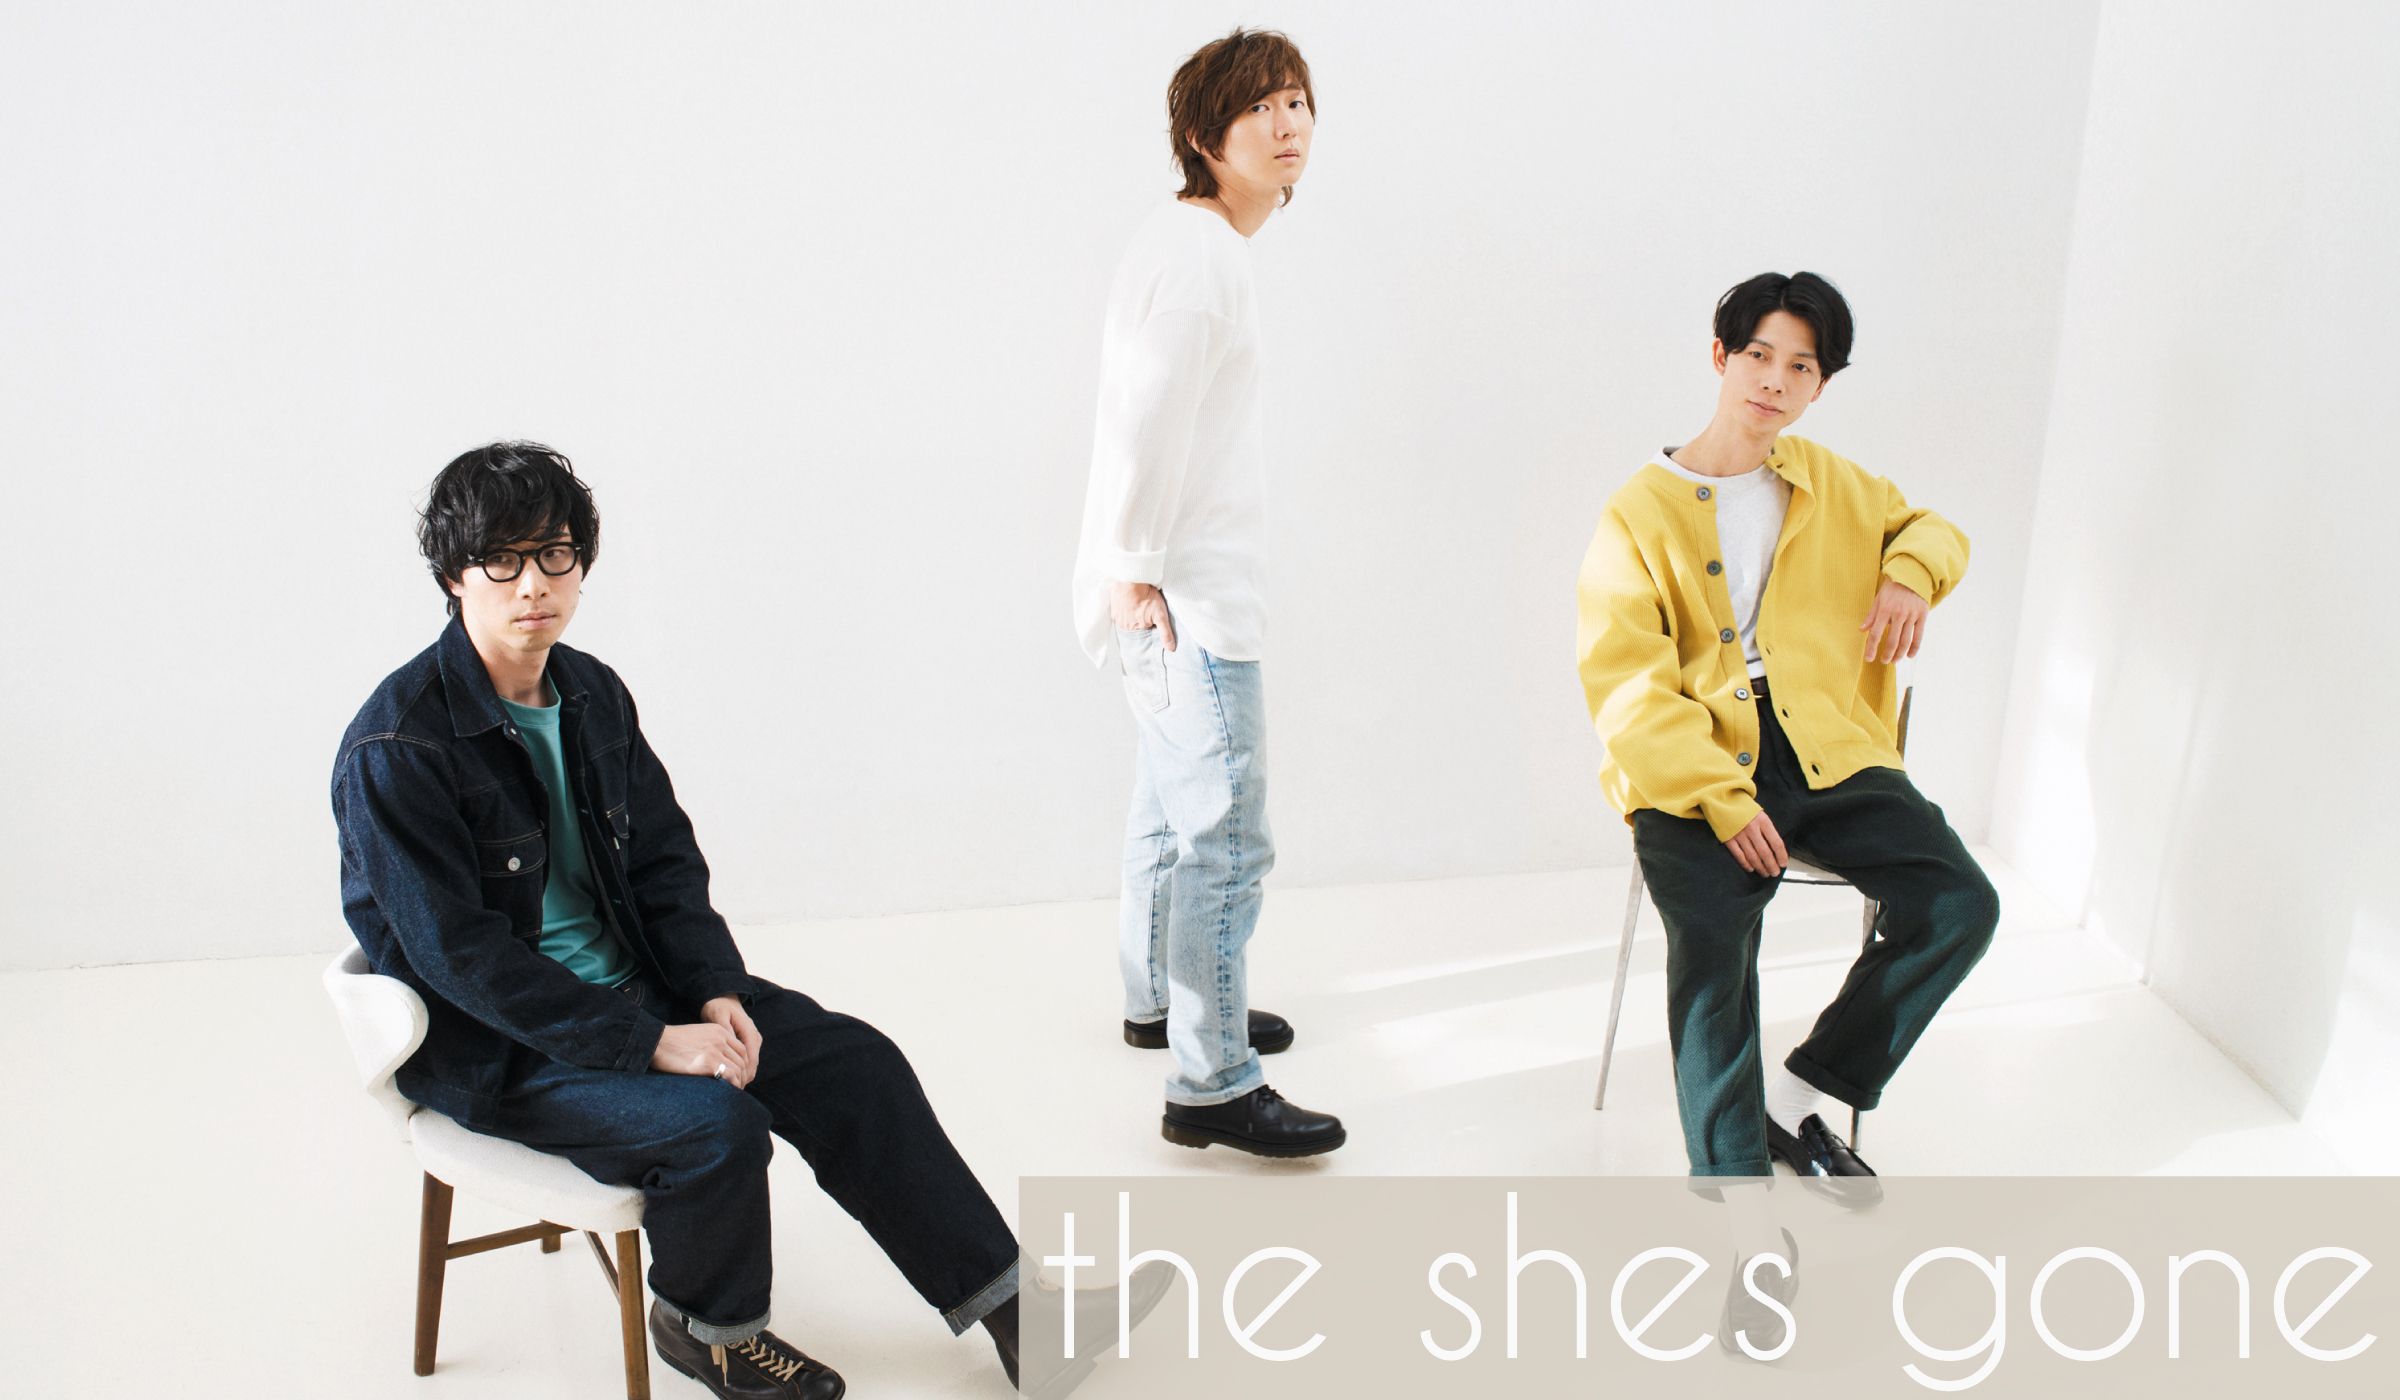 the shes gone│official fan club 「-apostrophes-」